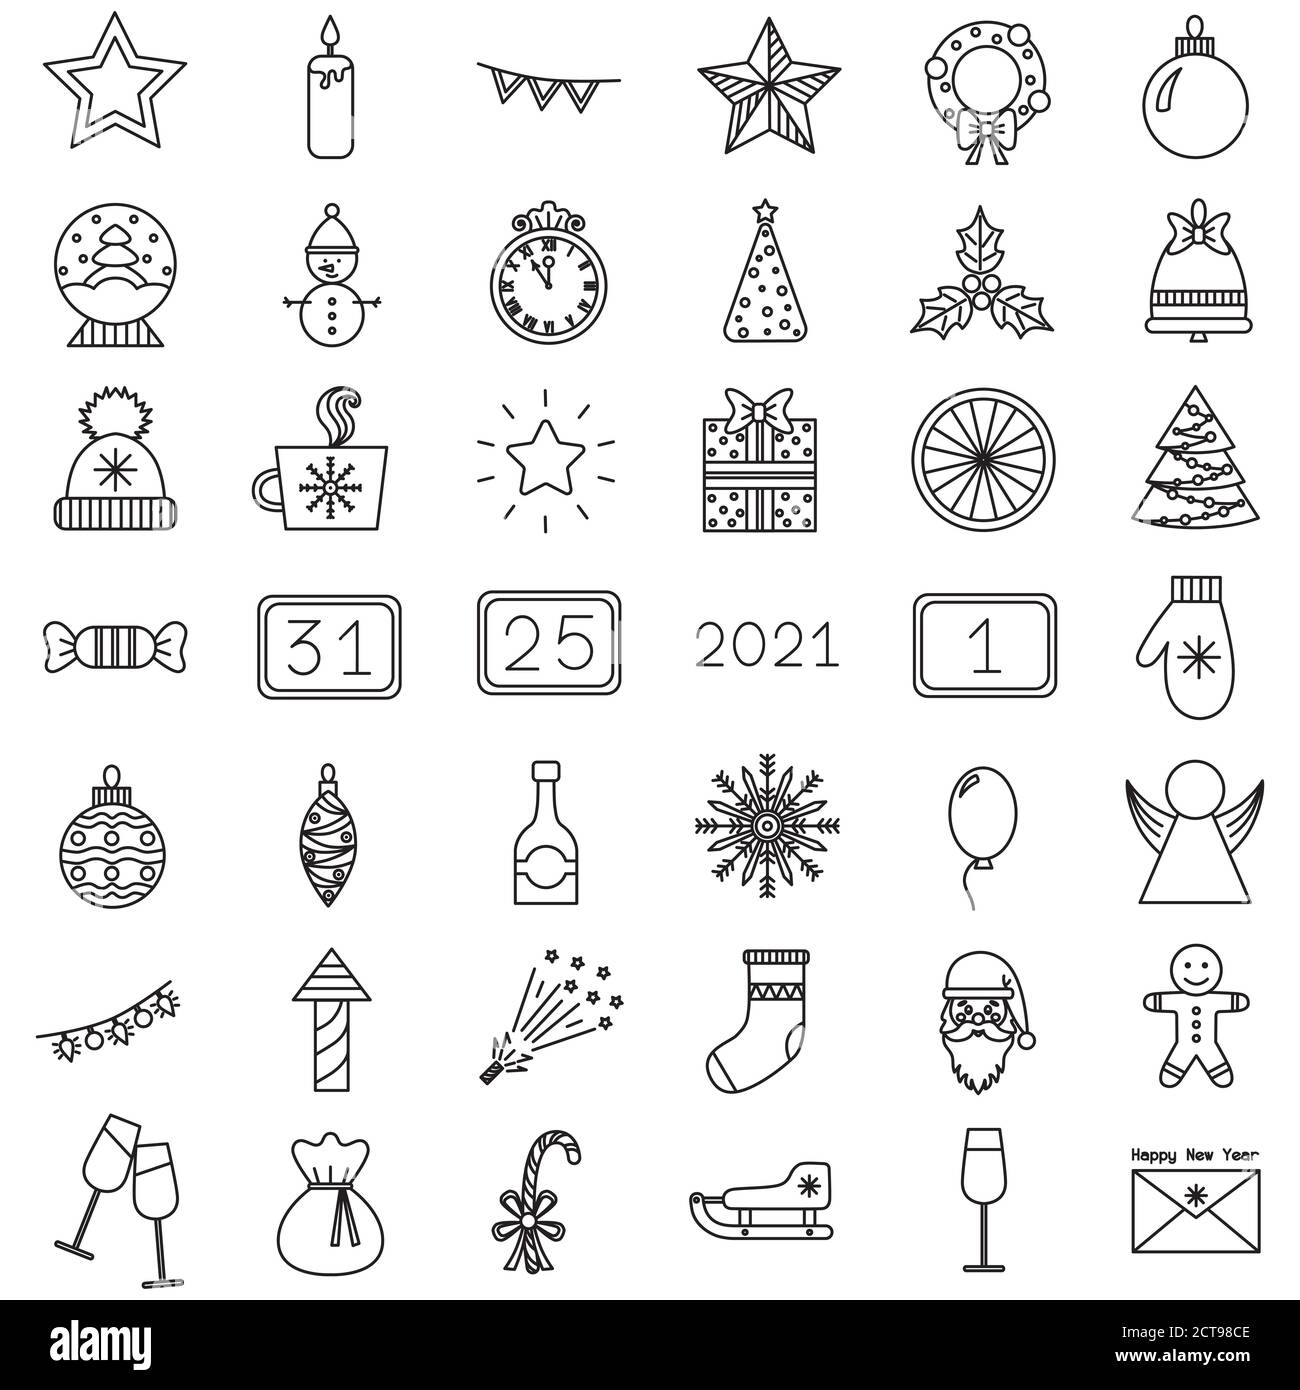 Vector Christmas icons. Calendar, clock, Christmas trees and other new year and Christmas items Stock Vector